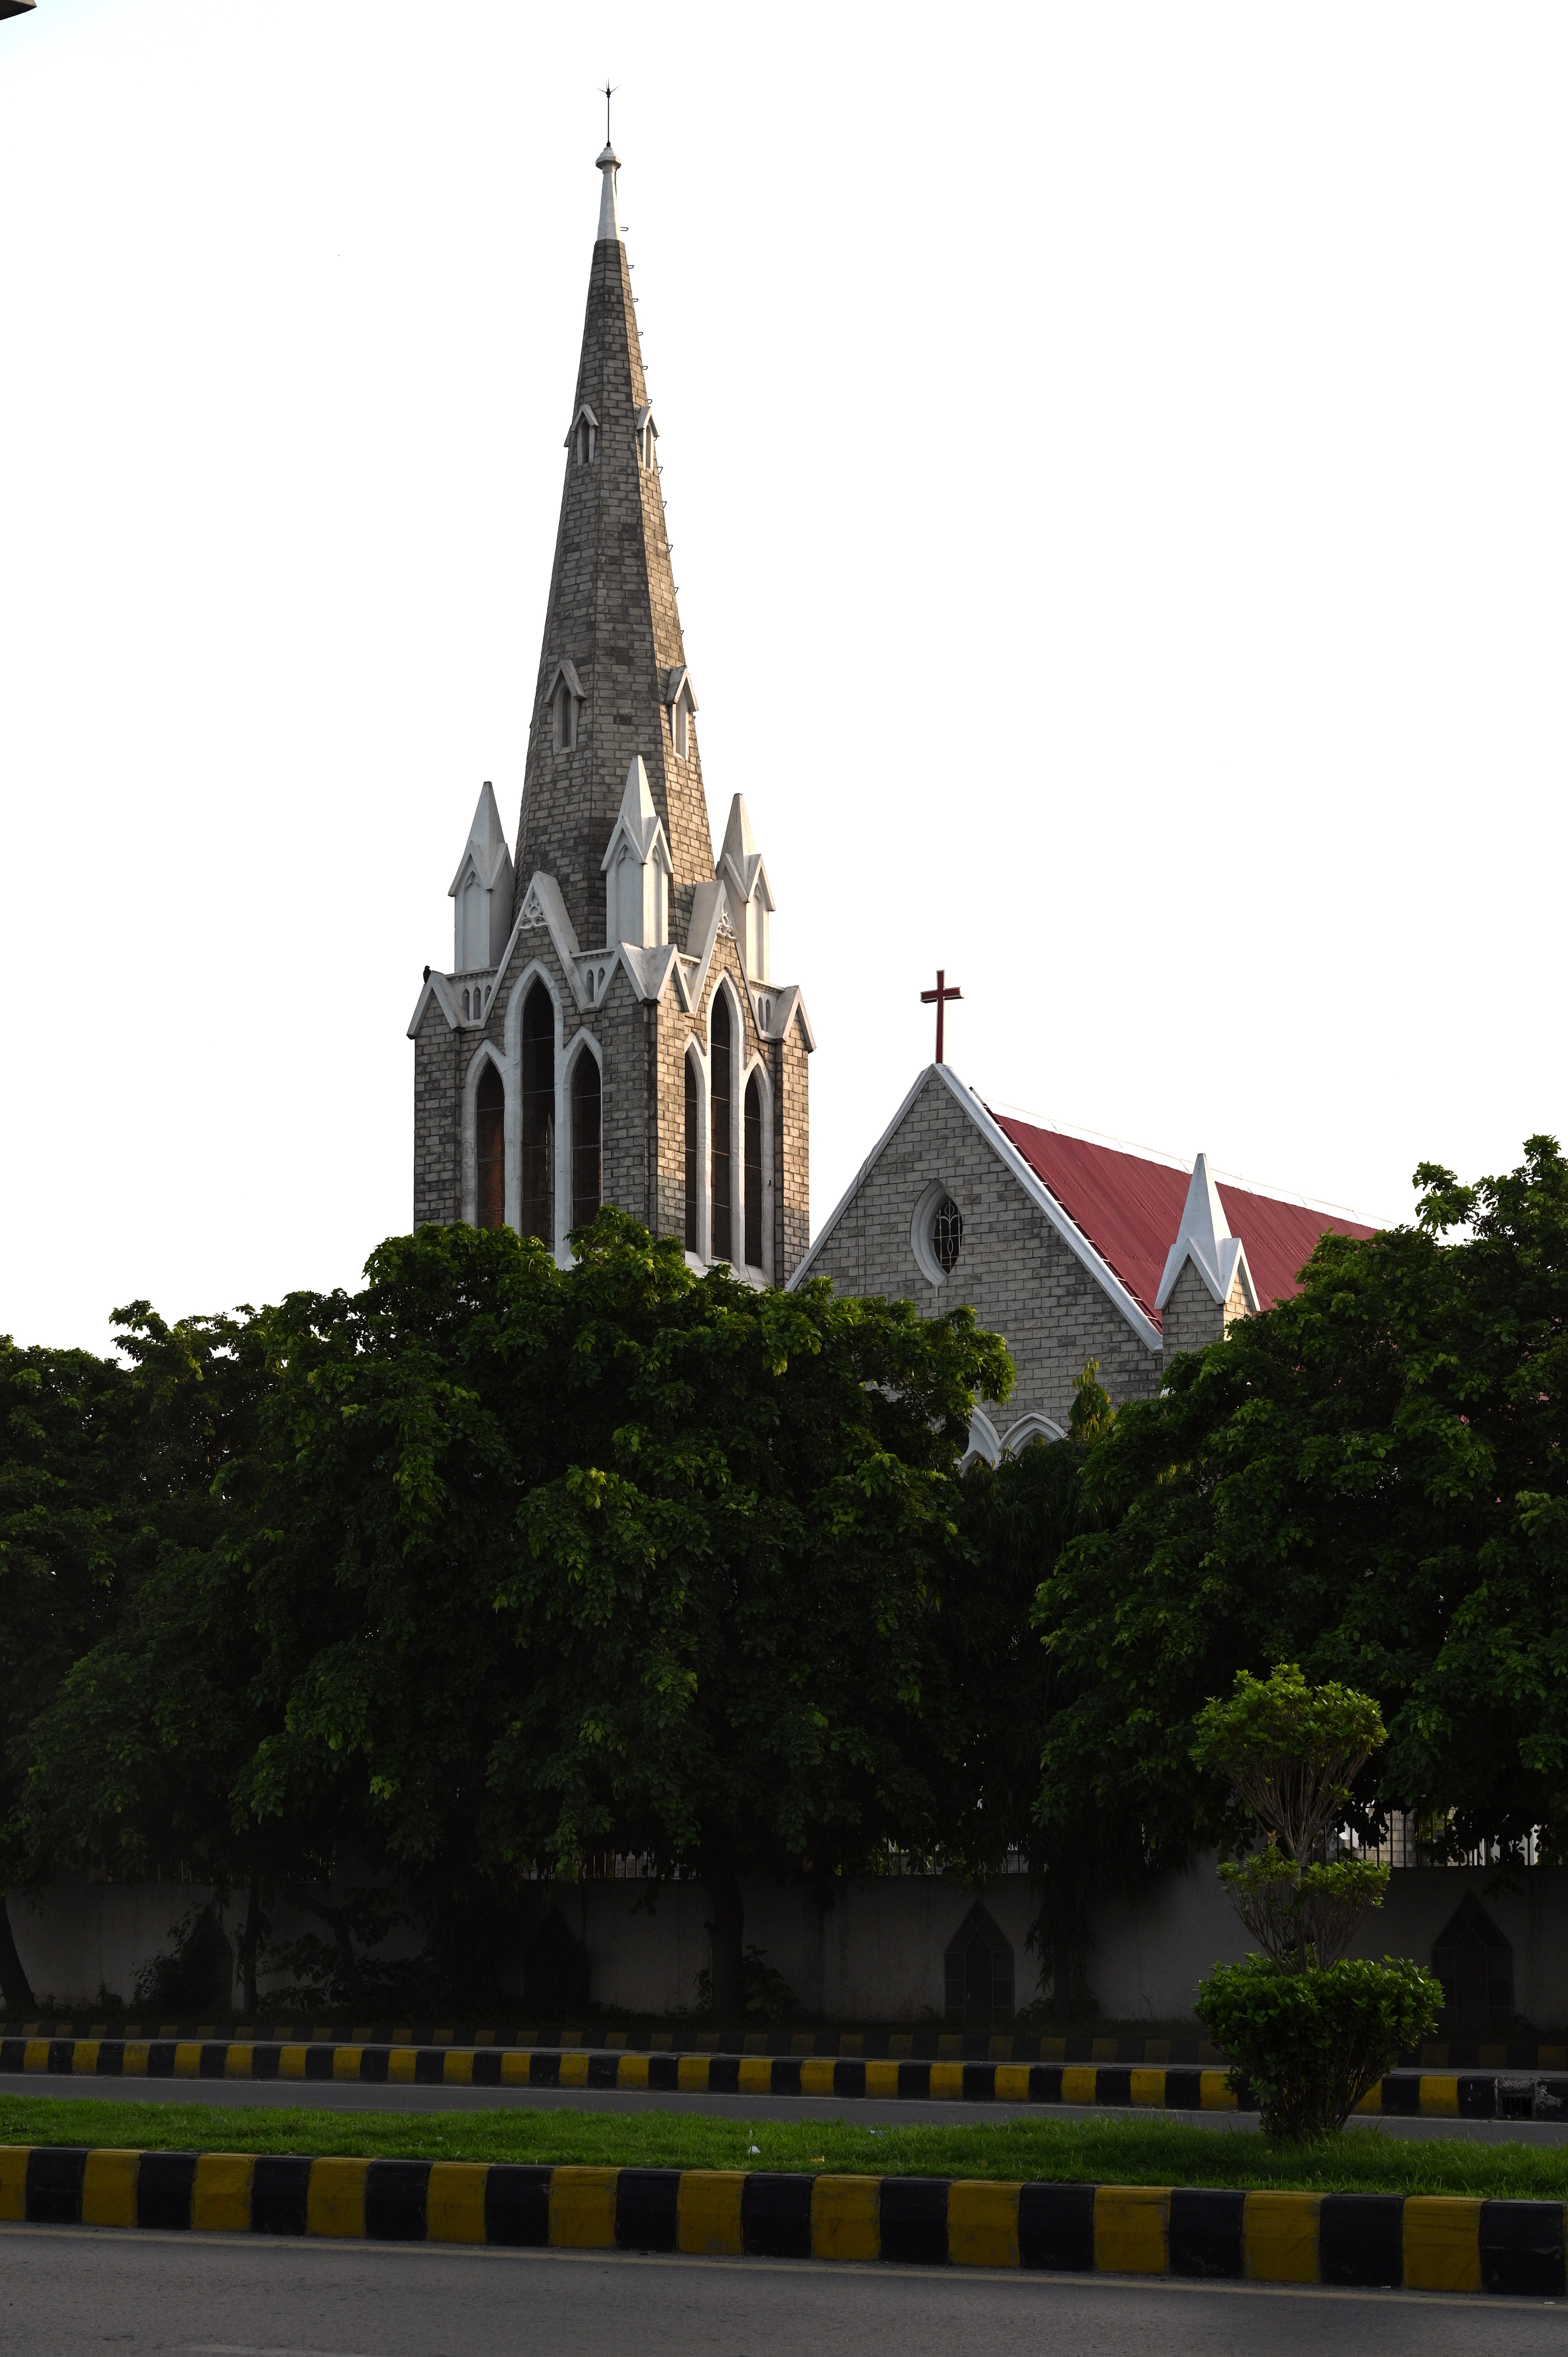 The saint Paul's Church founded in 1876 by Reverend G.J. Chree in cantt area